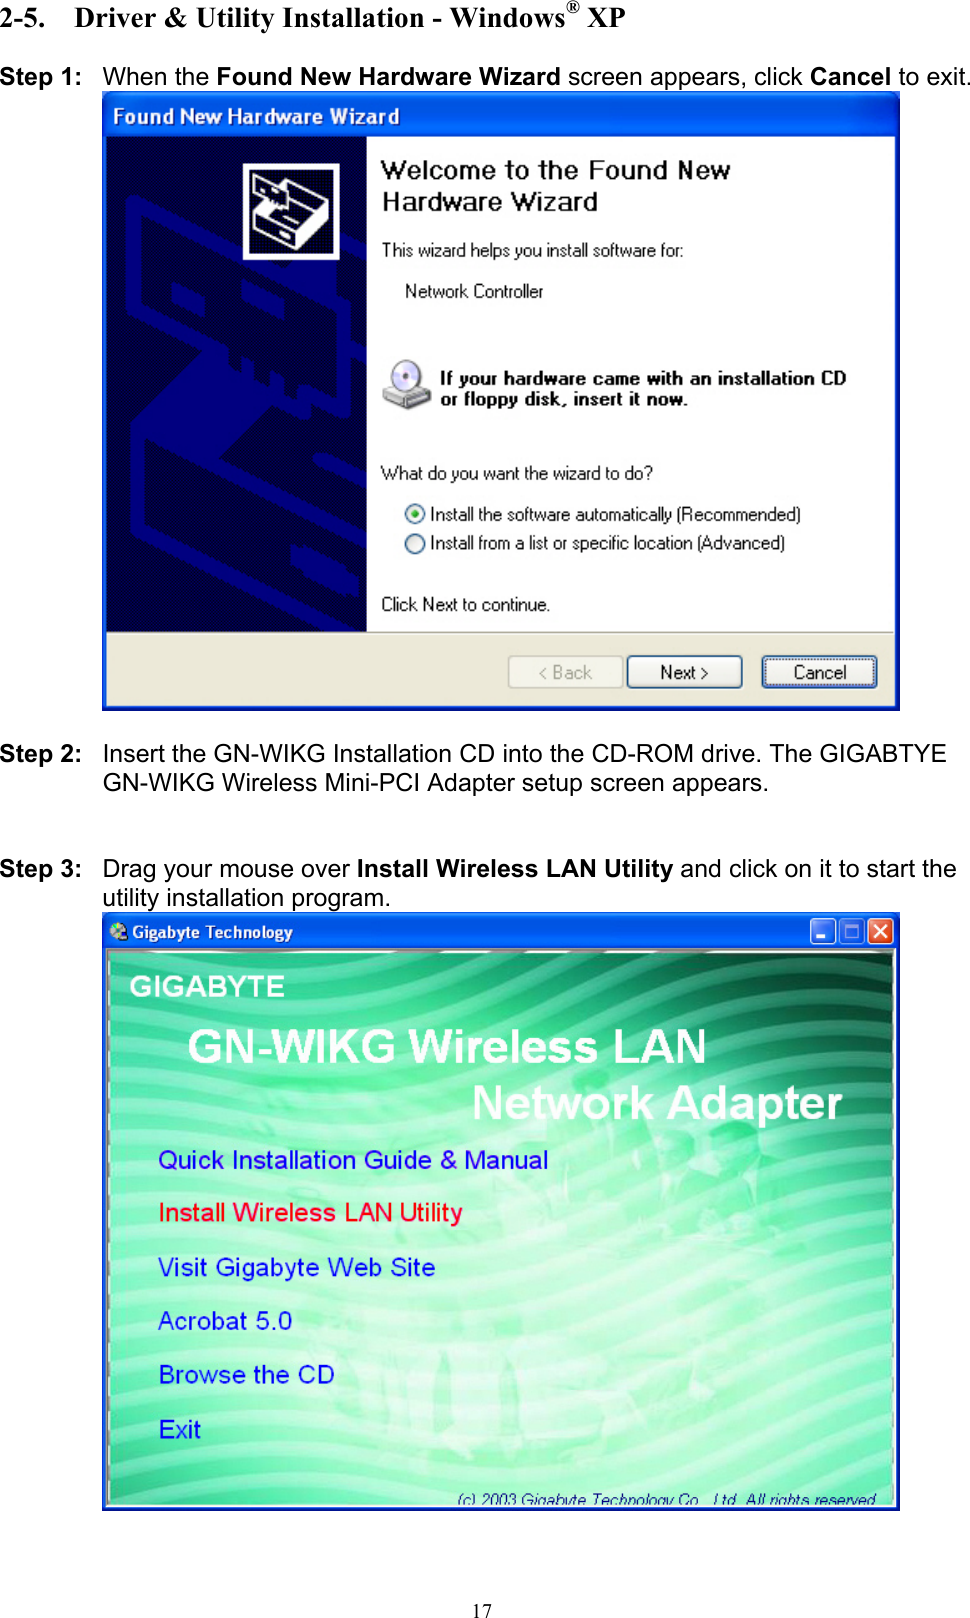 17  2-5.  Driver &amp; Utility Installation - Windows® XP  Step 1: When the Found New Hardware Wizard screen appears, click Cancel to exit.   Step 2:  Insert the GN-WIKG Installation CD into the CD-ROM drive. The GIGABTYE GN-WIKG Wireless Mini-PCI Adapter setup screen appears.   Step 3:  Drag your mouse over Install Wireless LAN Utility and click on it to start the utility installation program.   